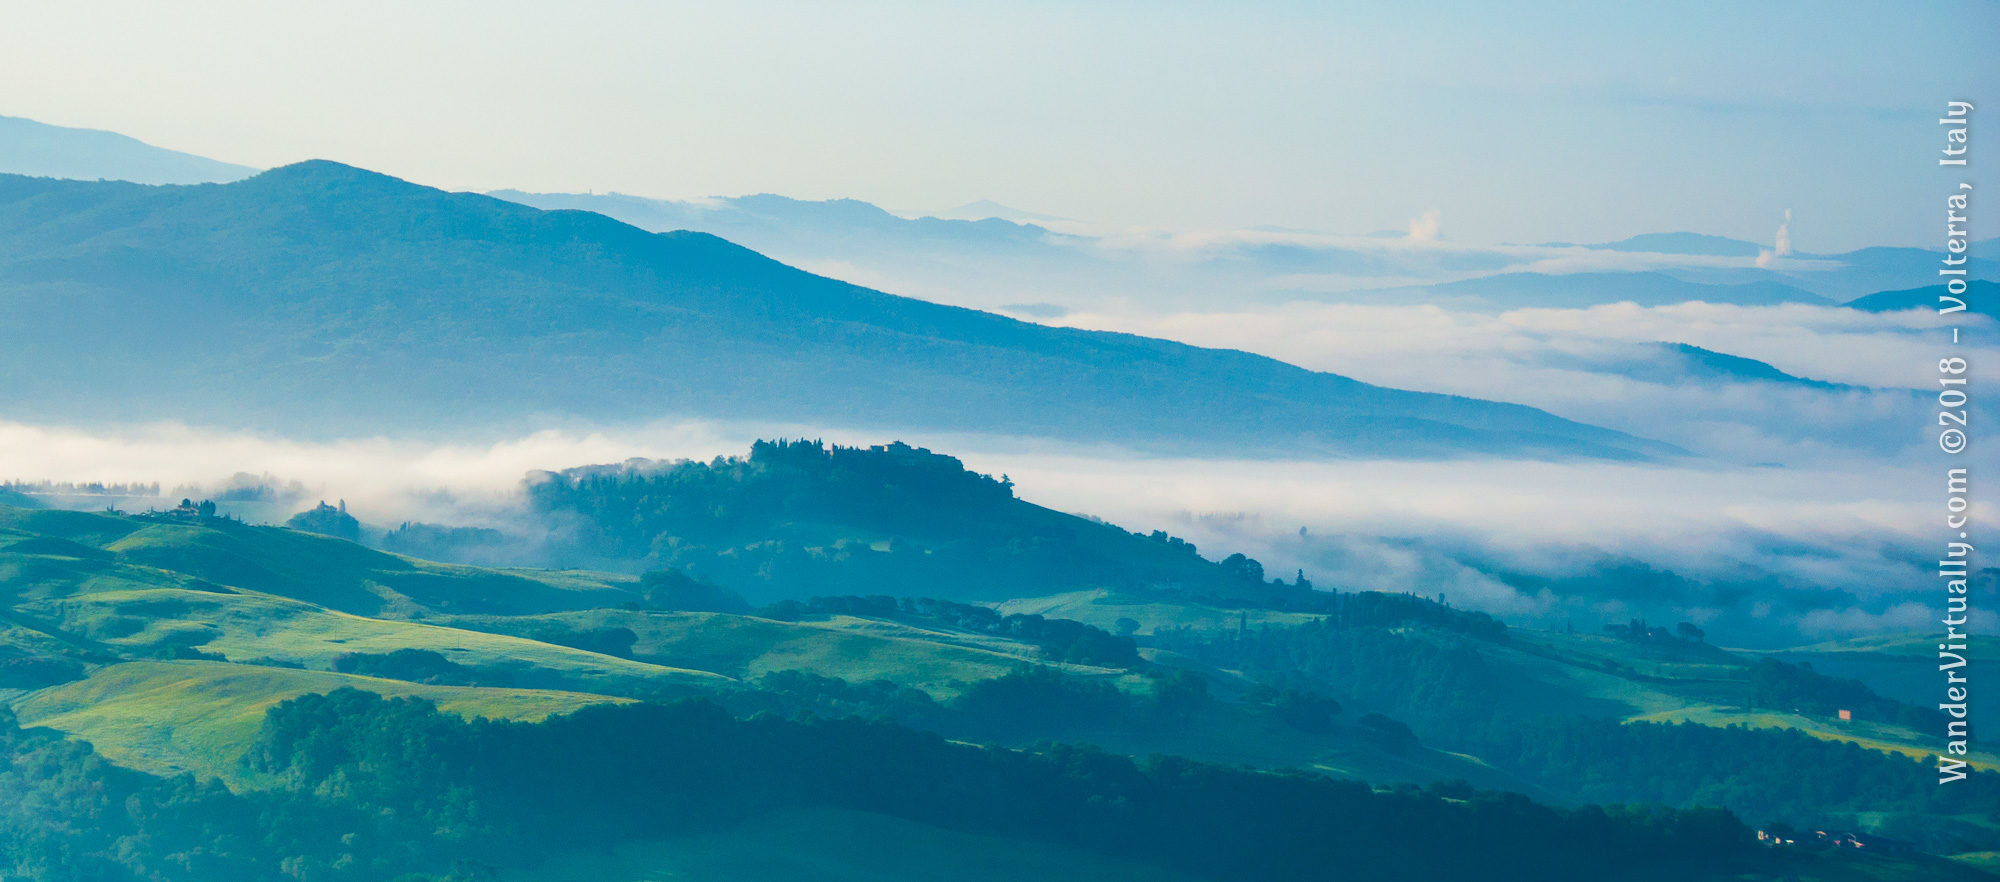 Mystical view of the Tuscan countryside at dawn - Volterra, Italy.